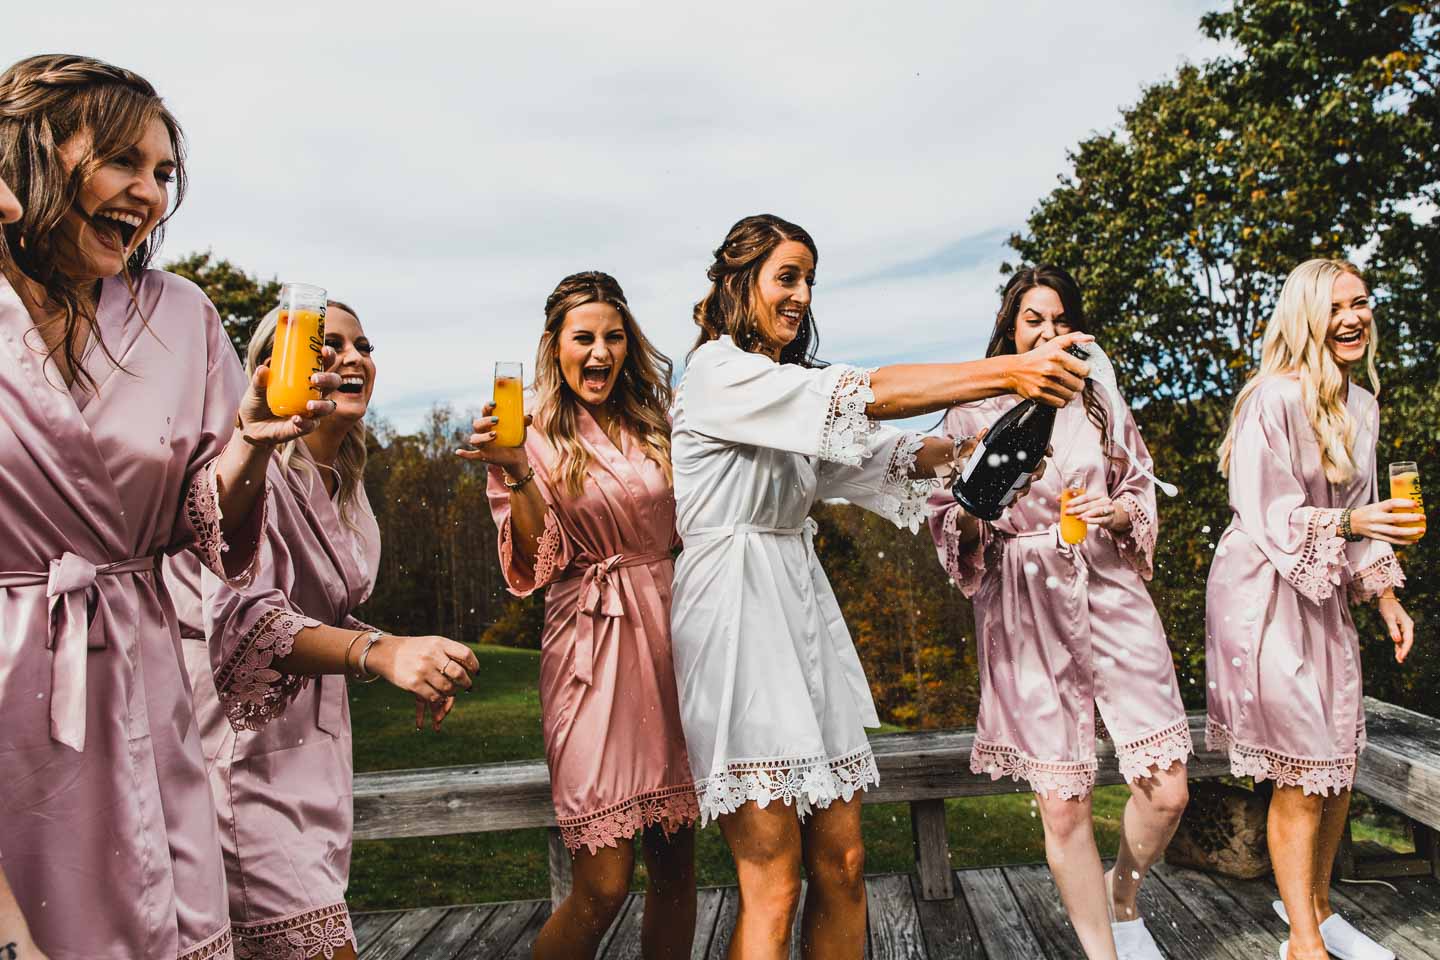 bride pops a cork on the champagne, making a mess surrounded by her laughing bridesmaids